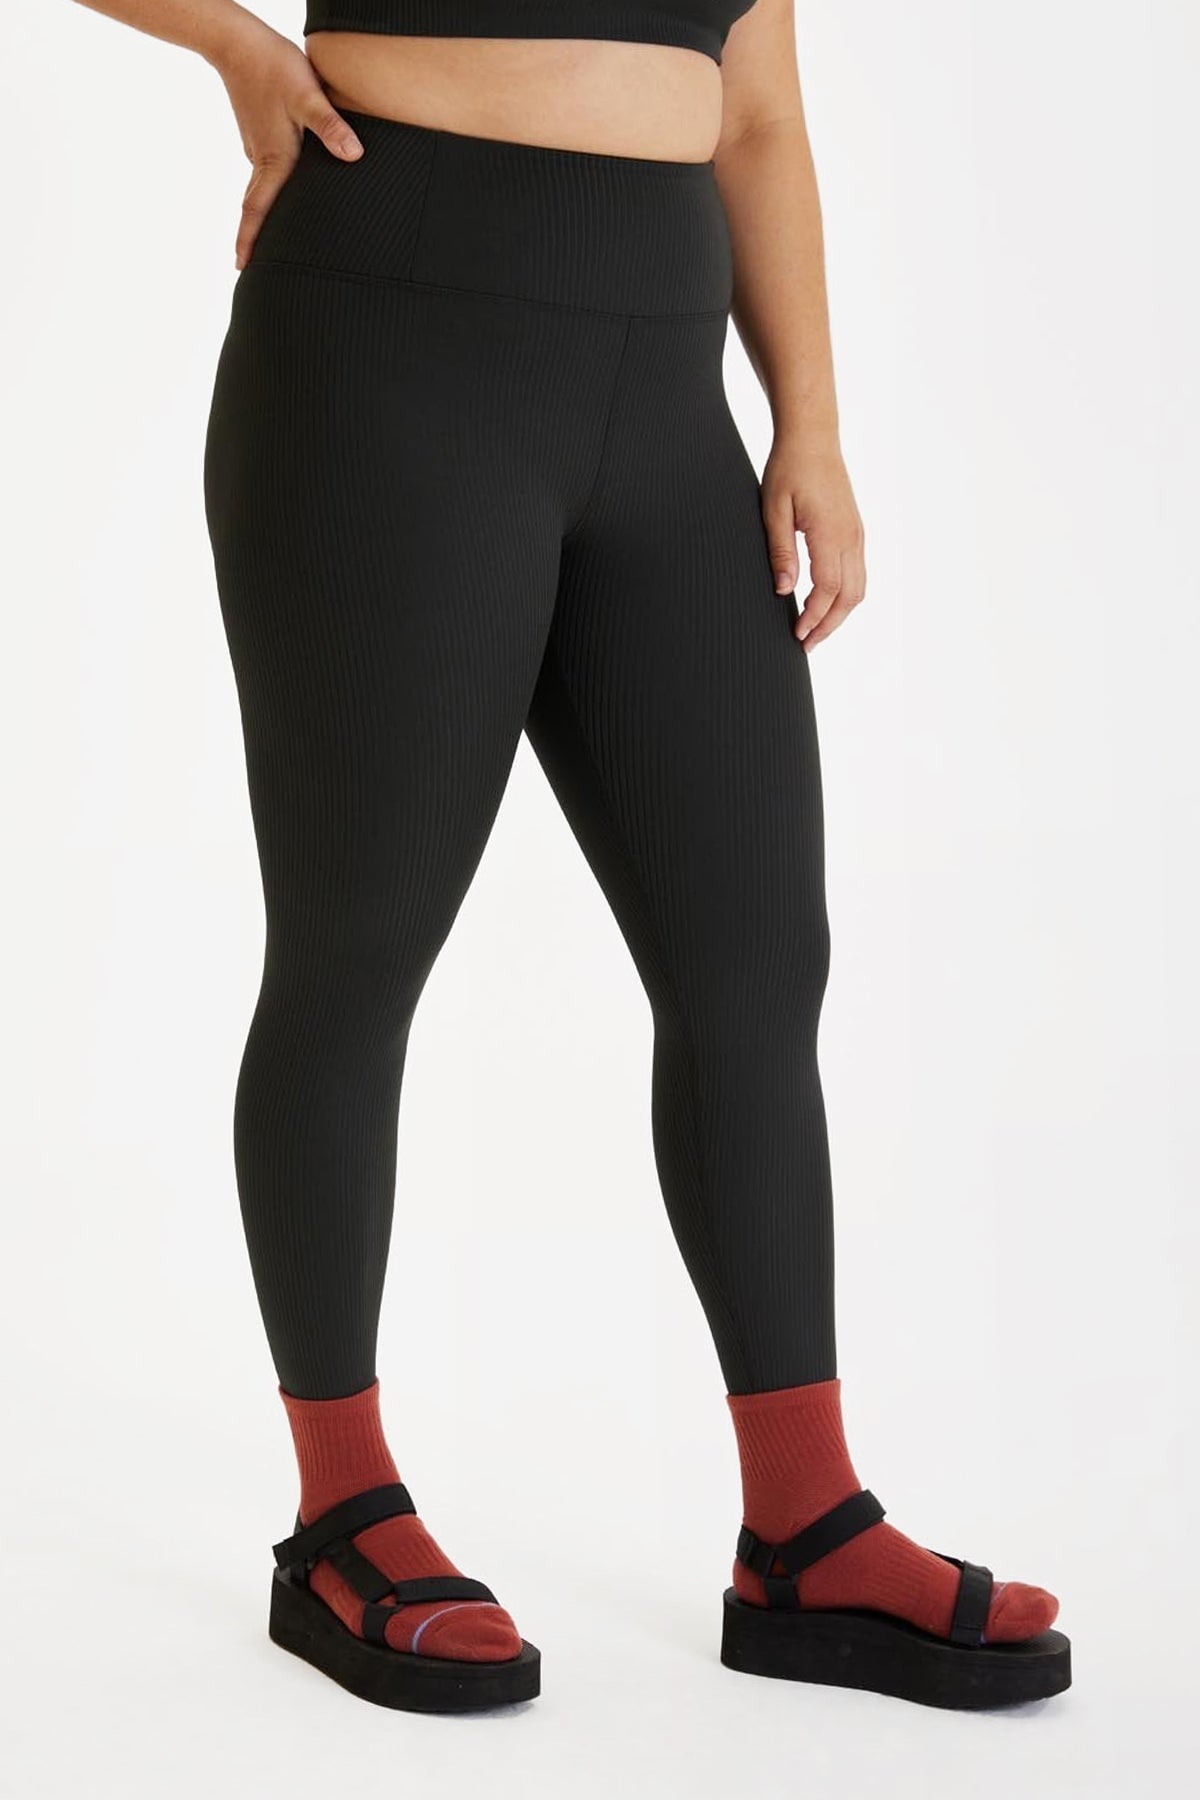 Girlfriend Collective High Rise Legging in Sky – Style Trend Clothiers